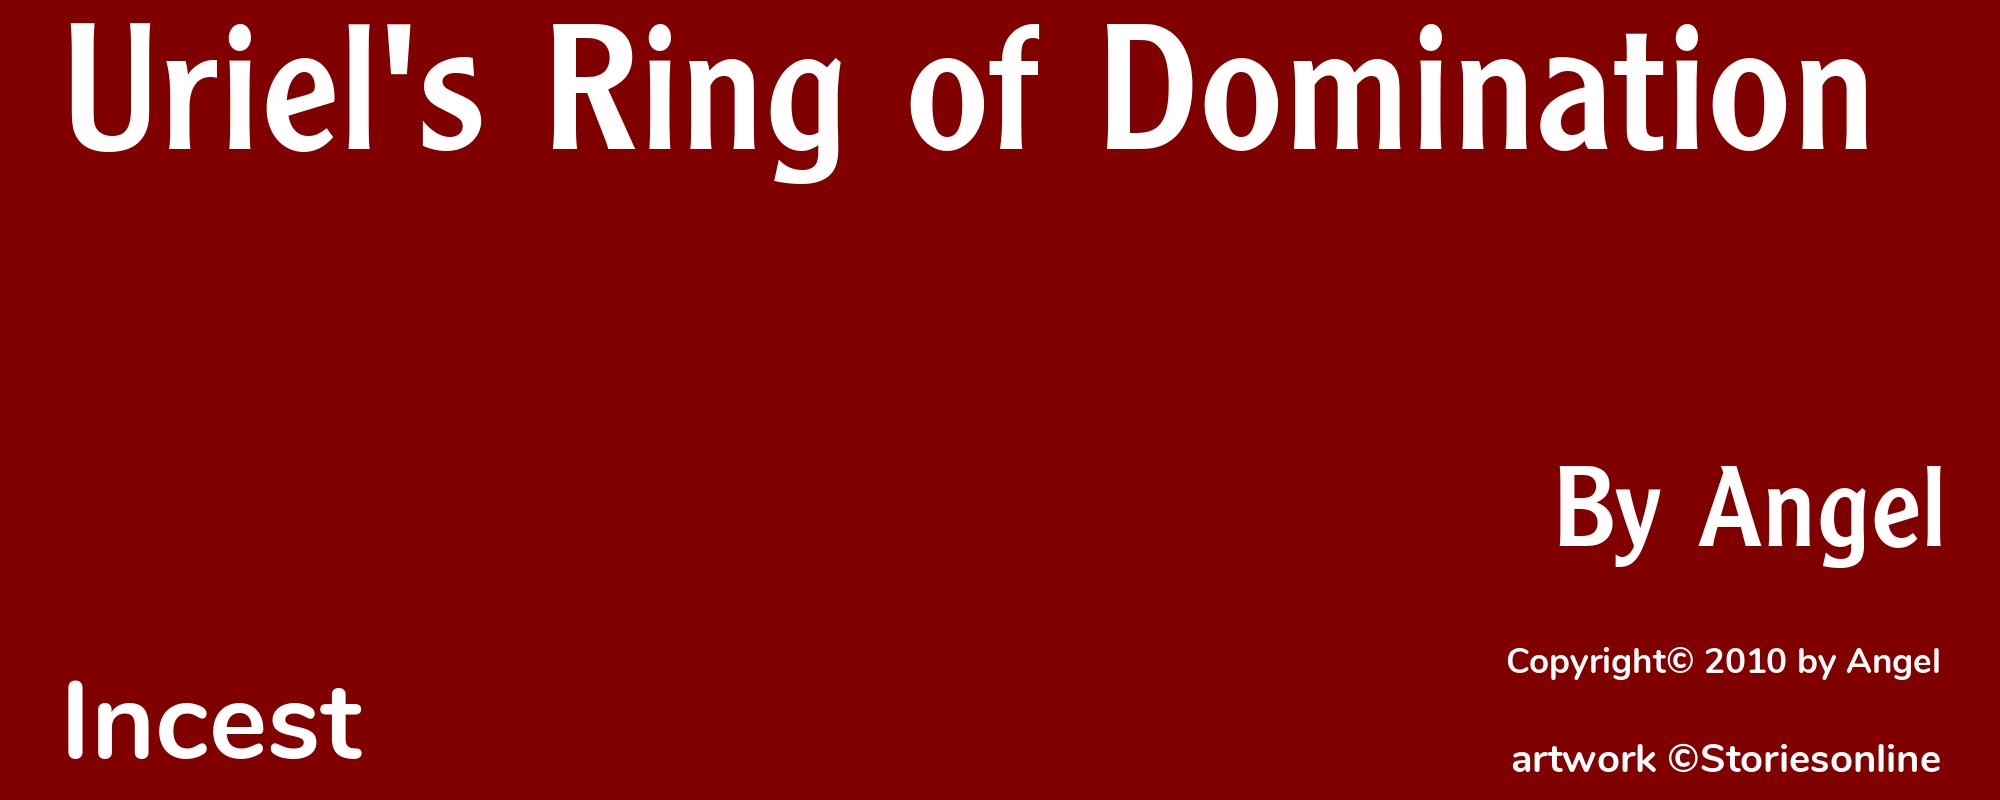 Uriel's Ring of Domination - Cover